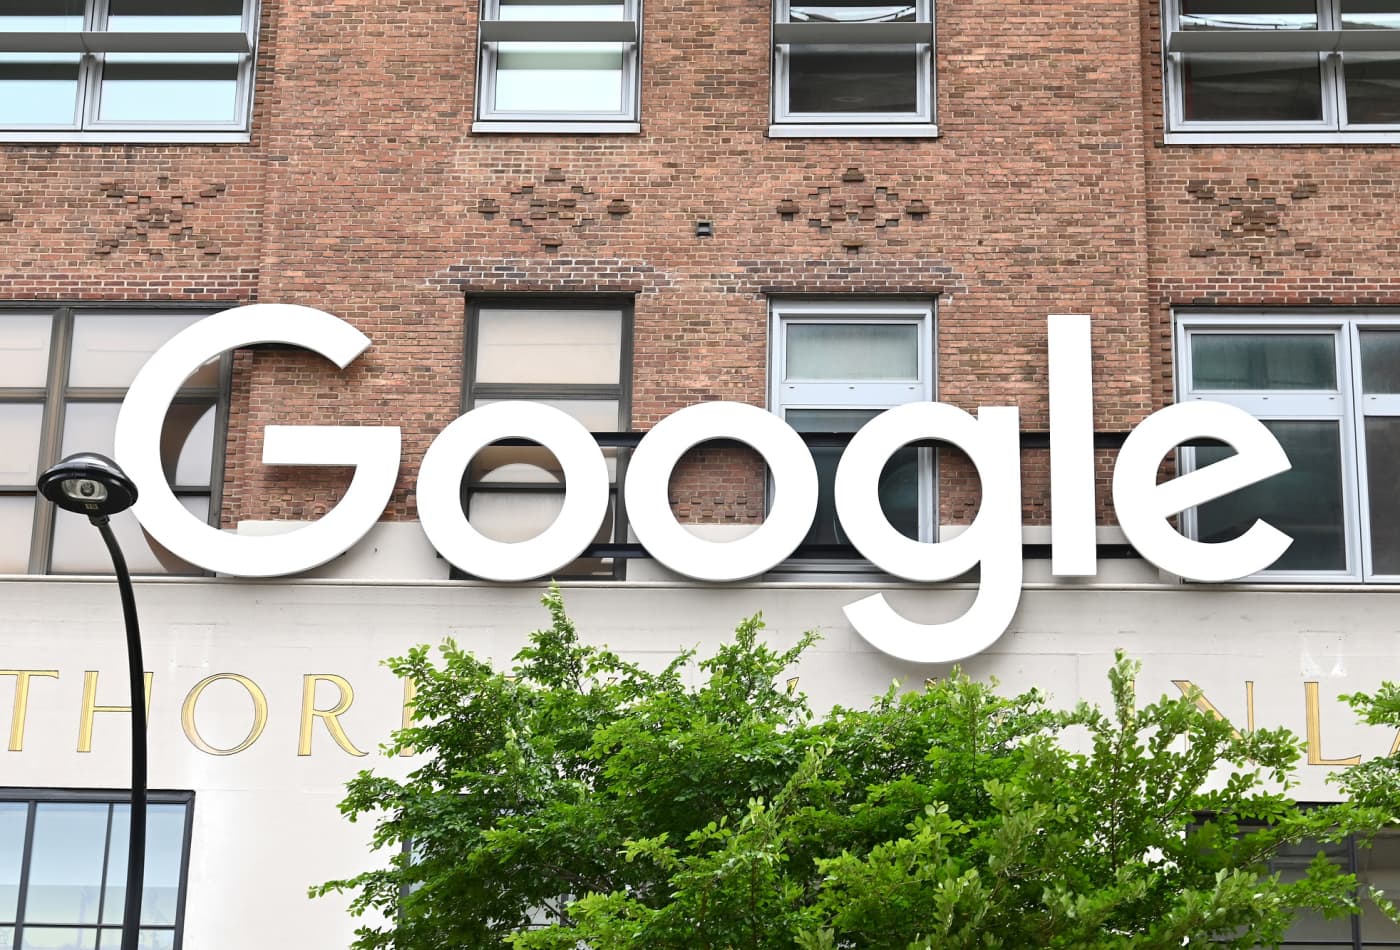 The Google logo outside if its New York City offices, which were closed on May 19, 2020 due to the coronavirus pandemic.